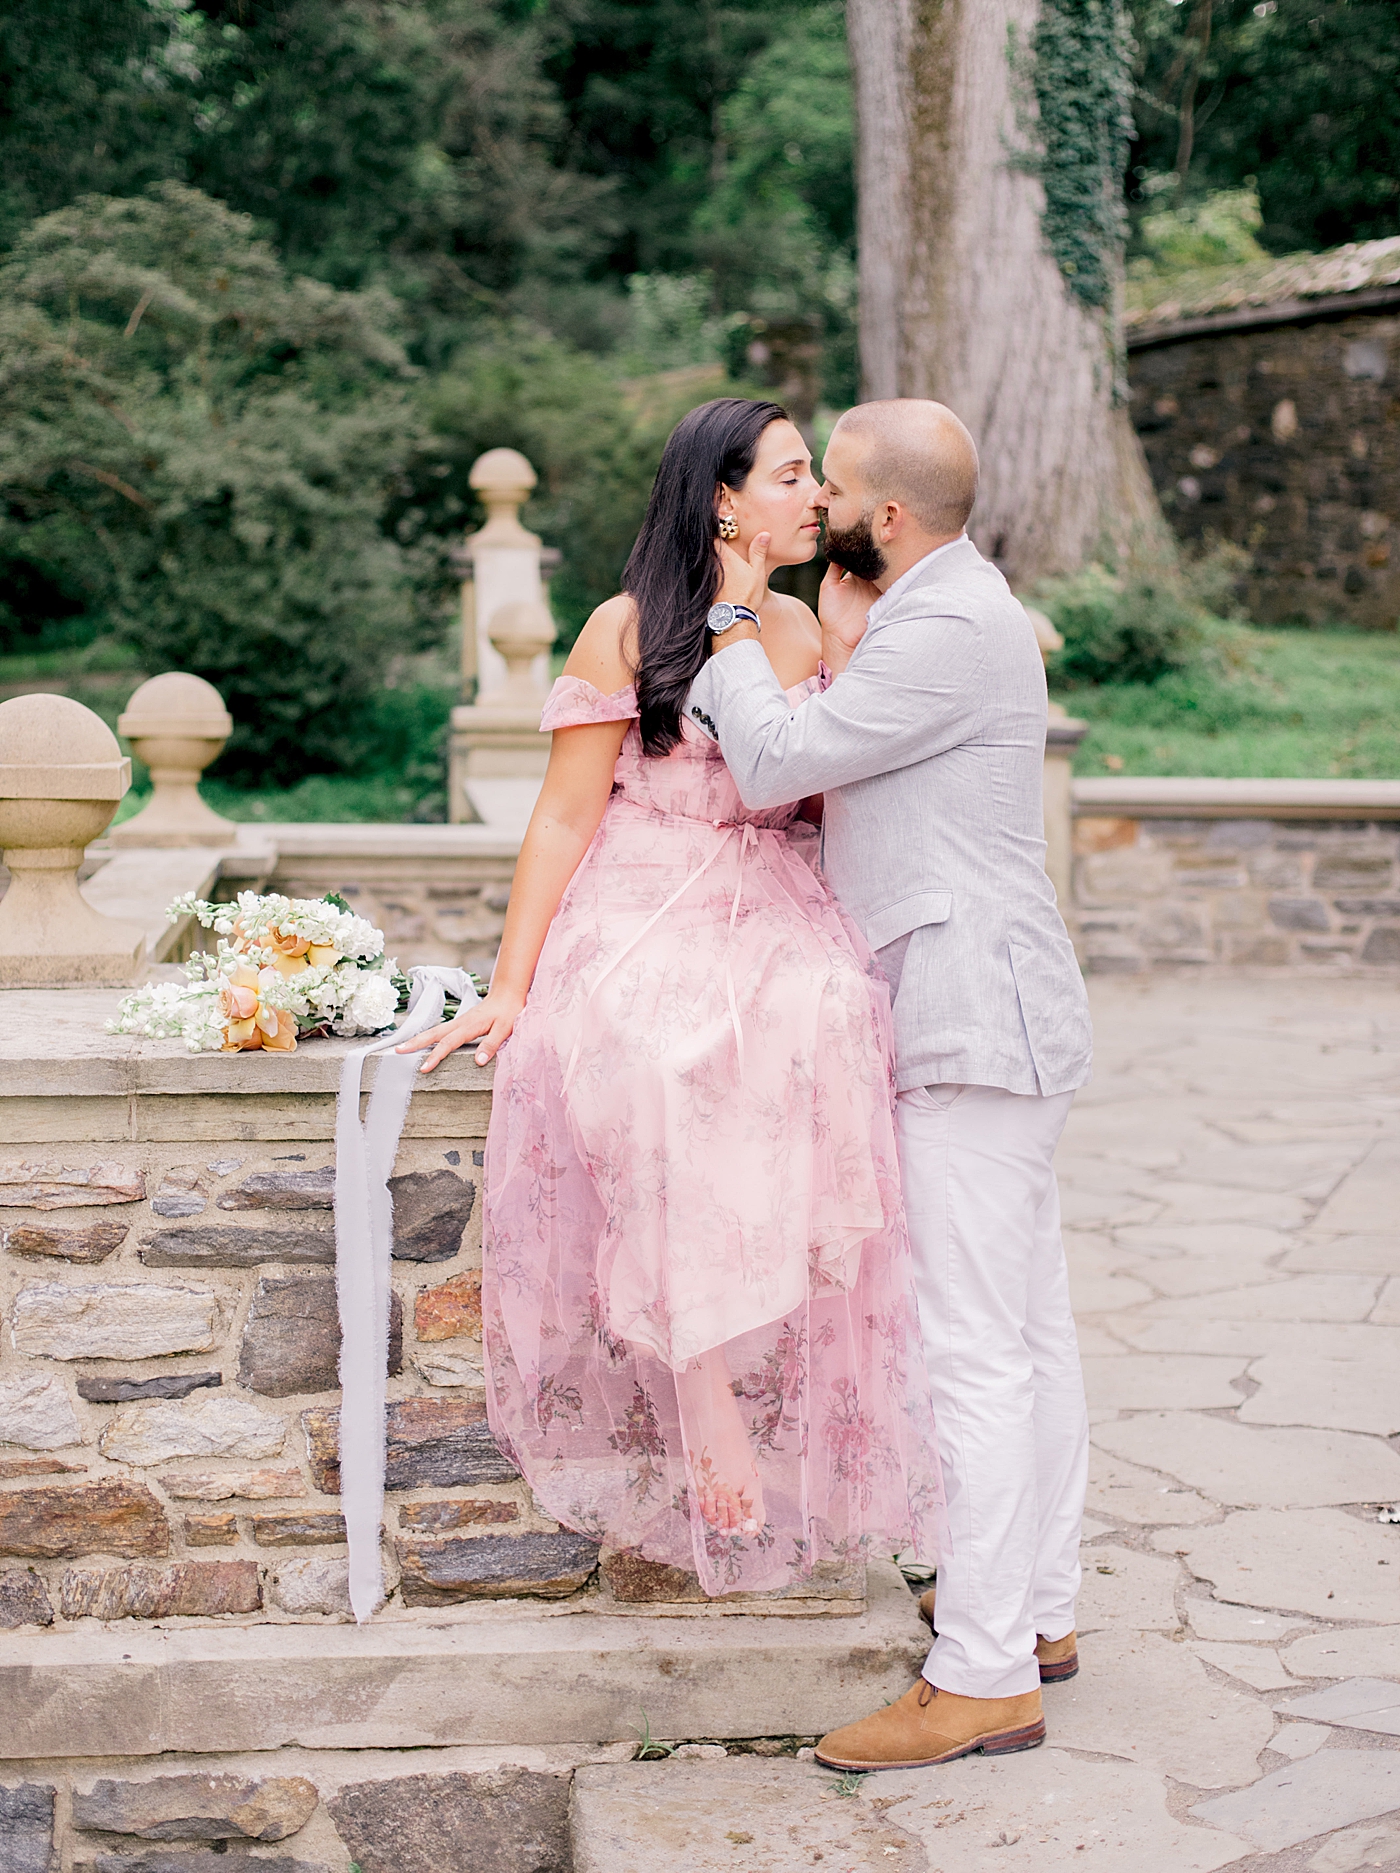 Couple in formal attired kissing sitting on a rock wall | Styling and Planning Engagement Sessions with Hope Helmuth Photography